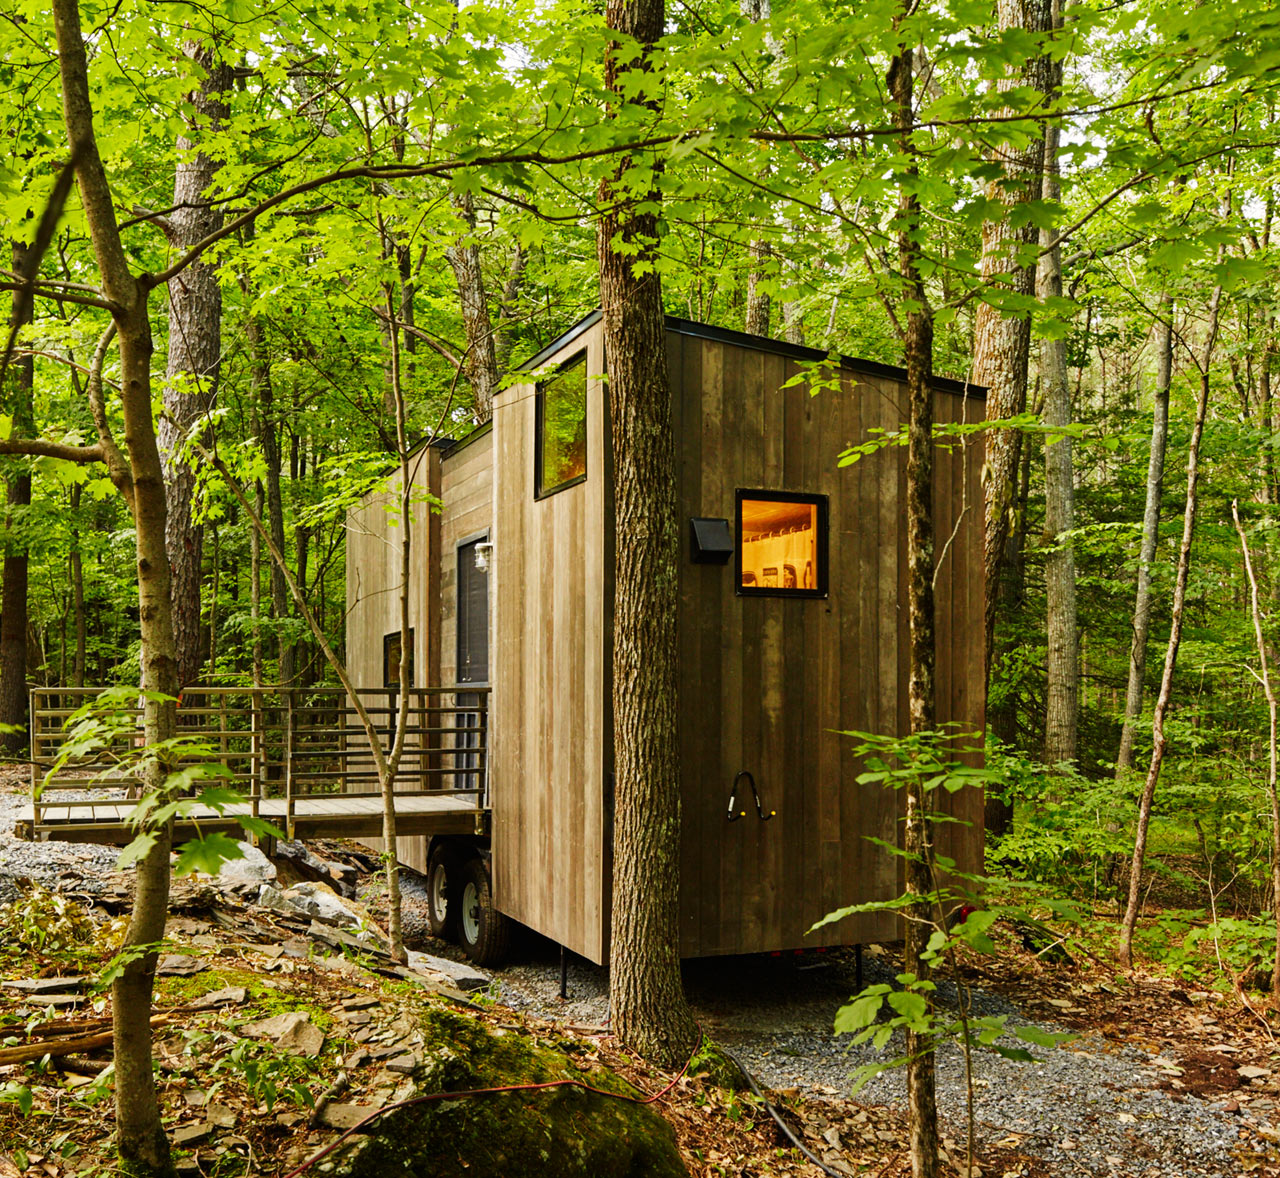 Getaway: Tiny Houses in the Woods You Can Rent